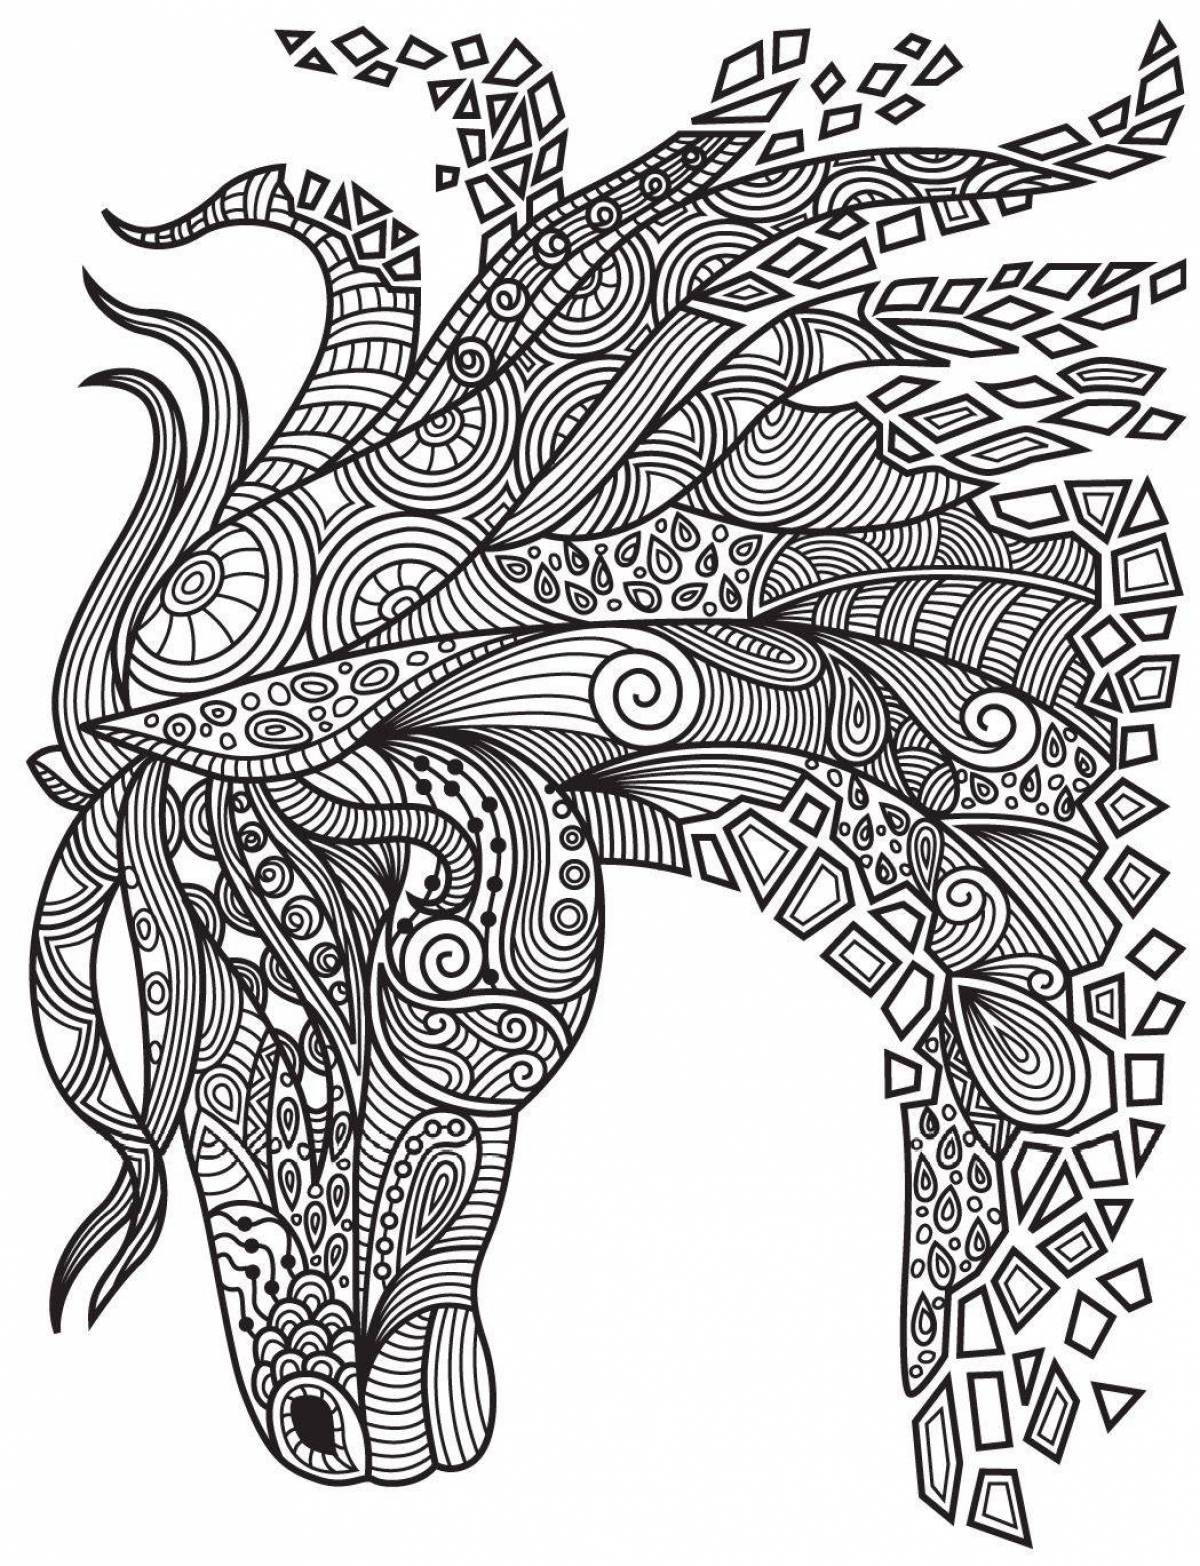 Hugs coloring page